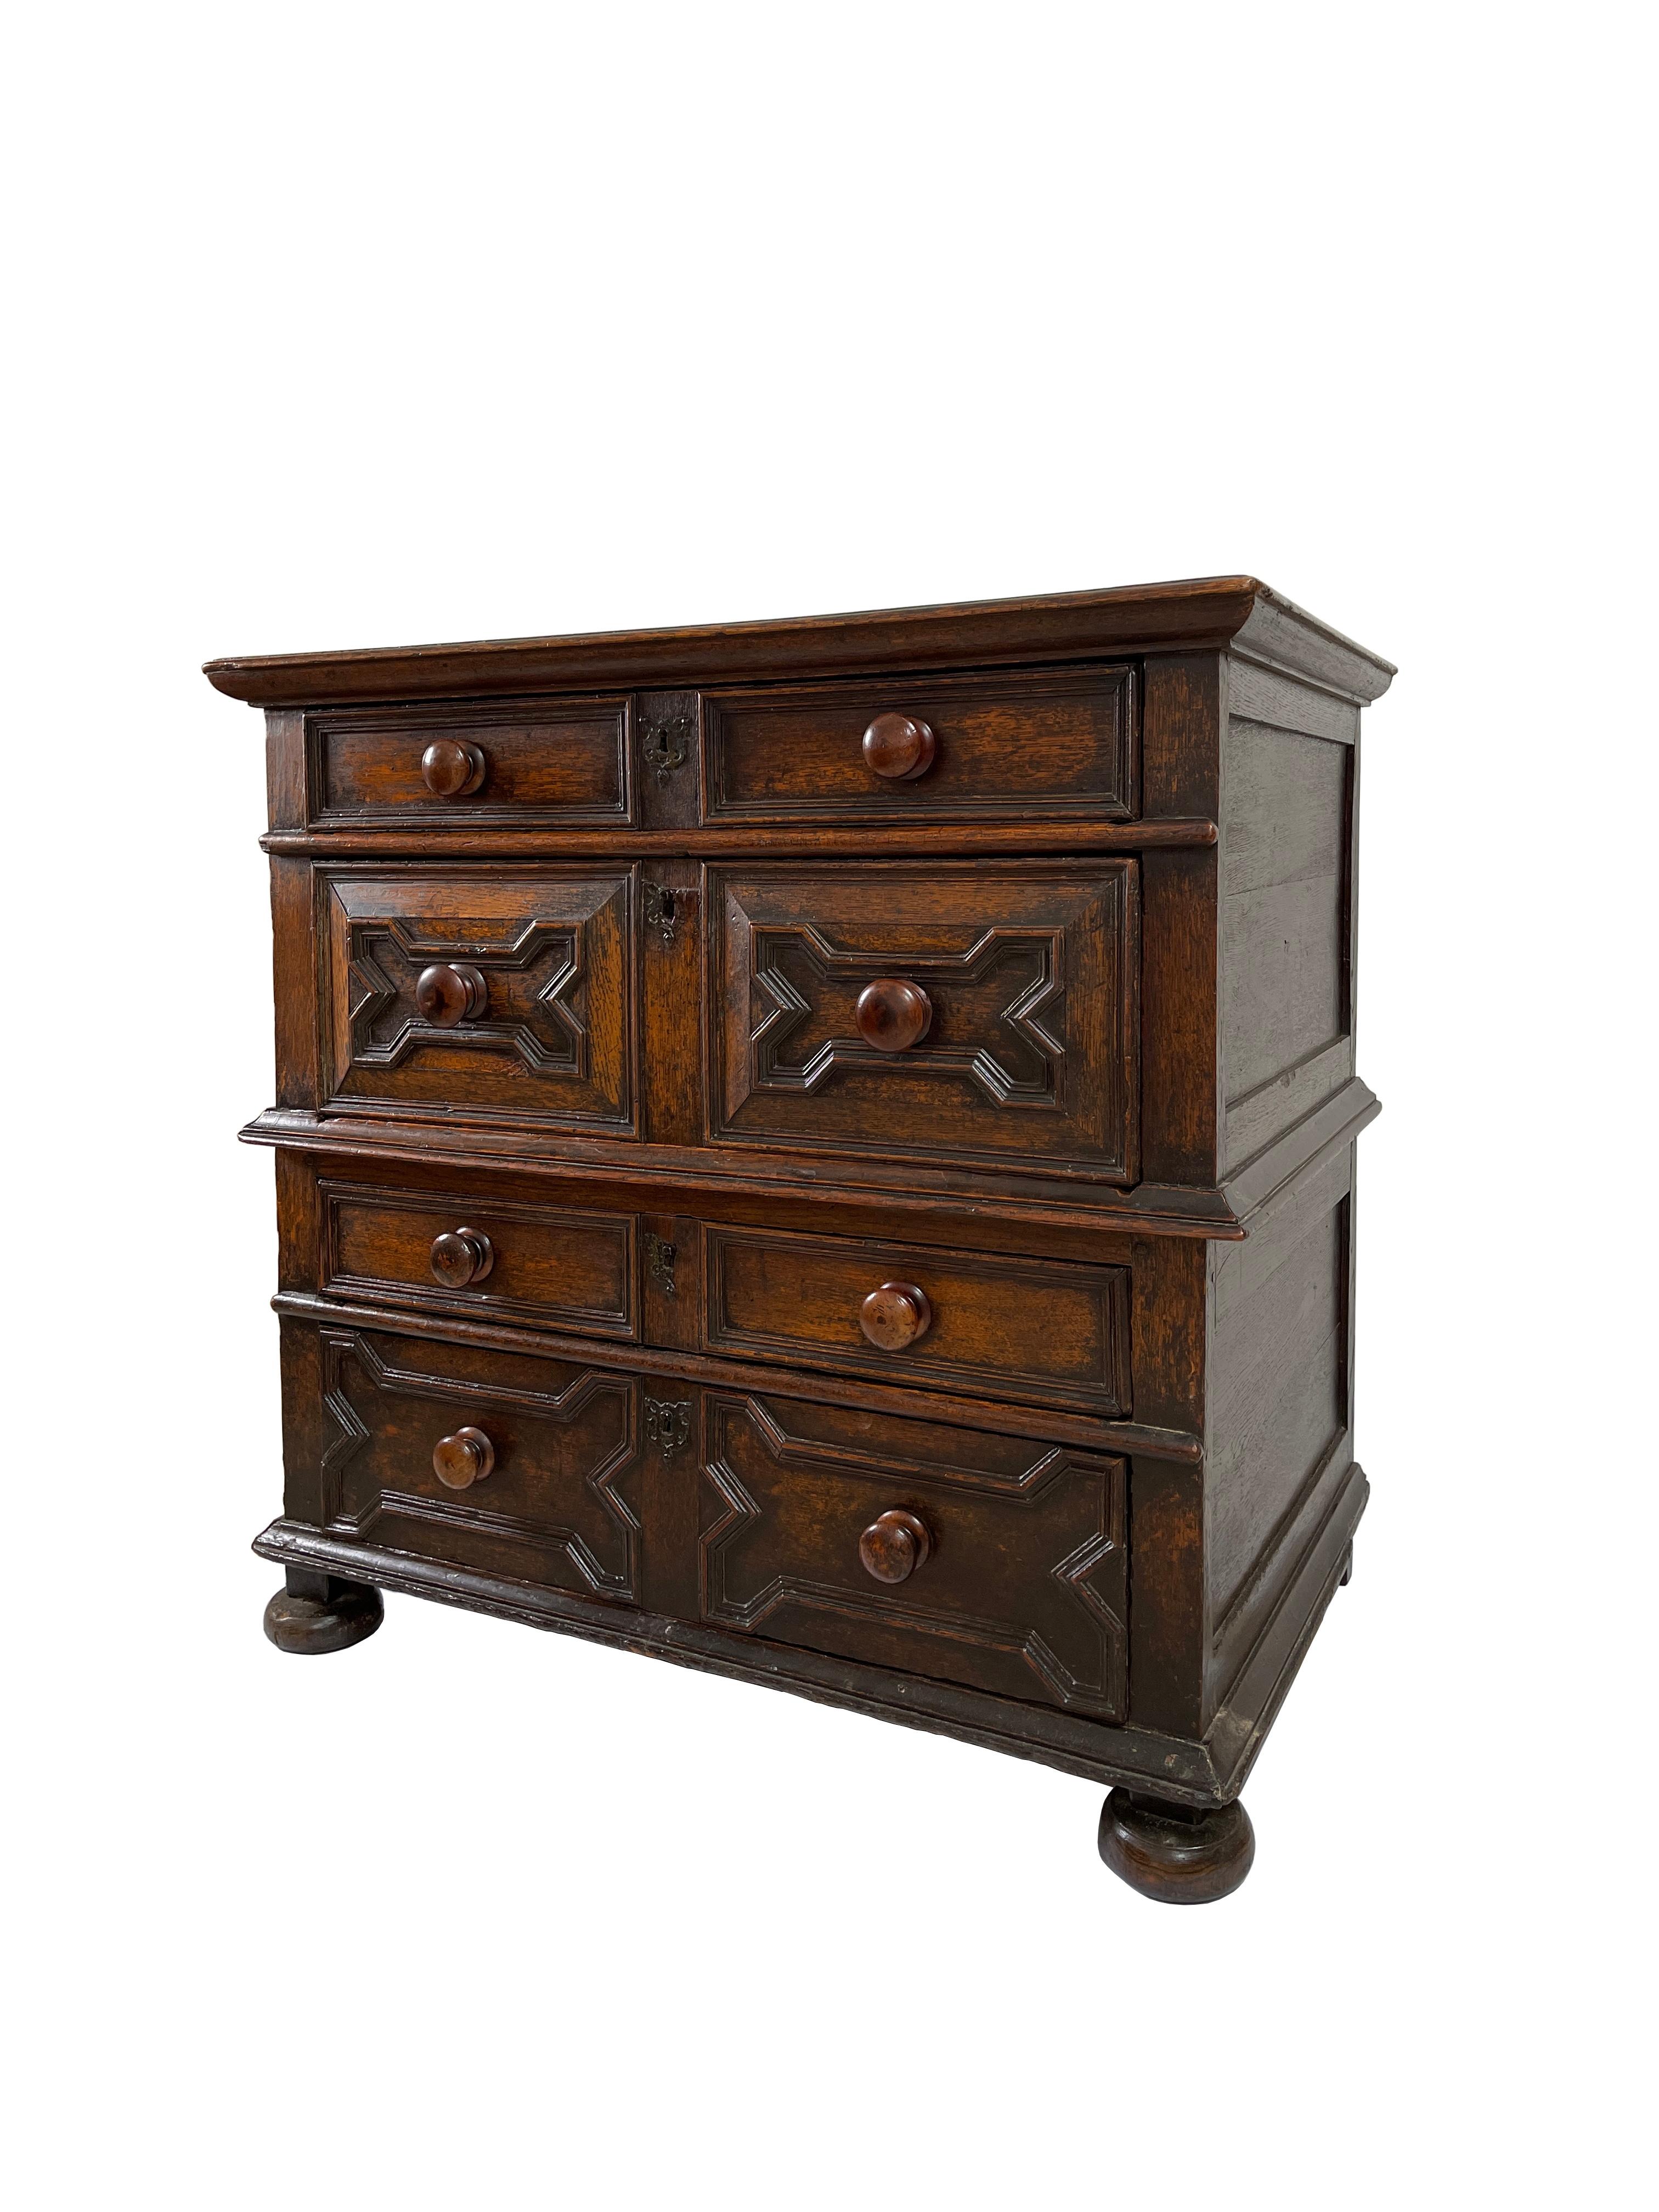 - A wonderful oak geometric chest of drawers from the Georgian era.
- The oak is in an incredible condition for its age with a well figured wild grain and rich patina.
- There are four drawers in total each with exquisite geometric design and